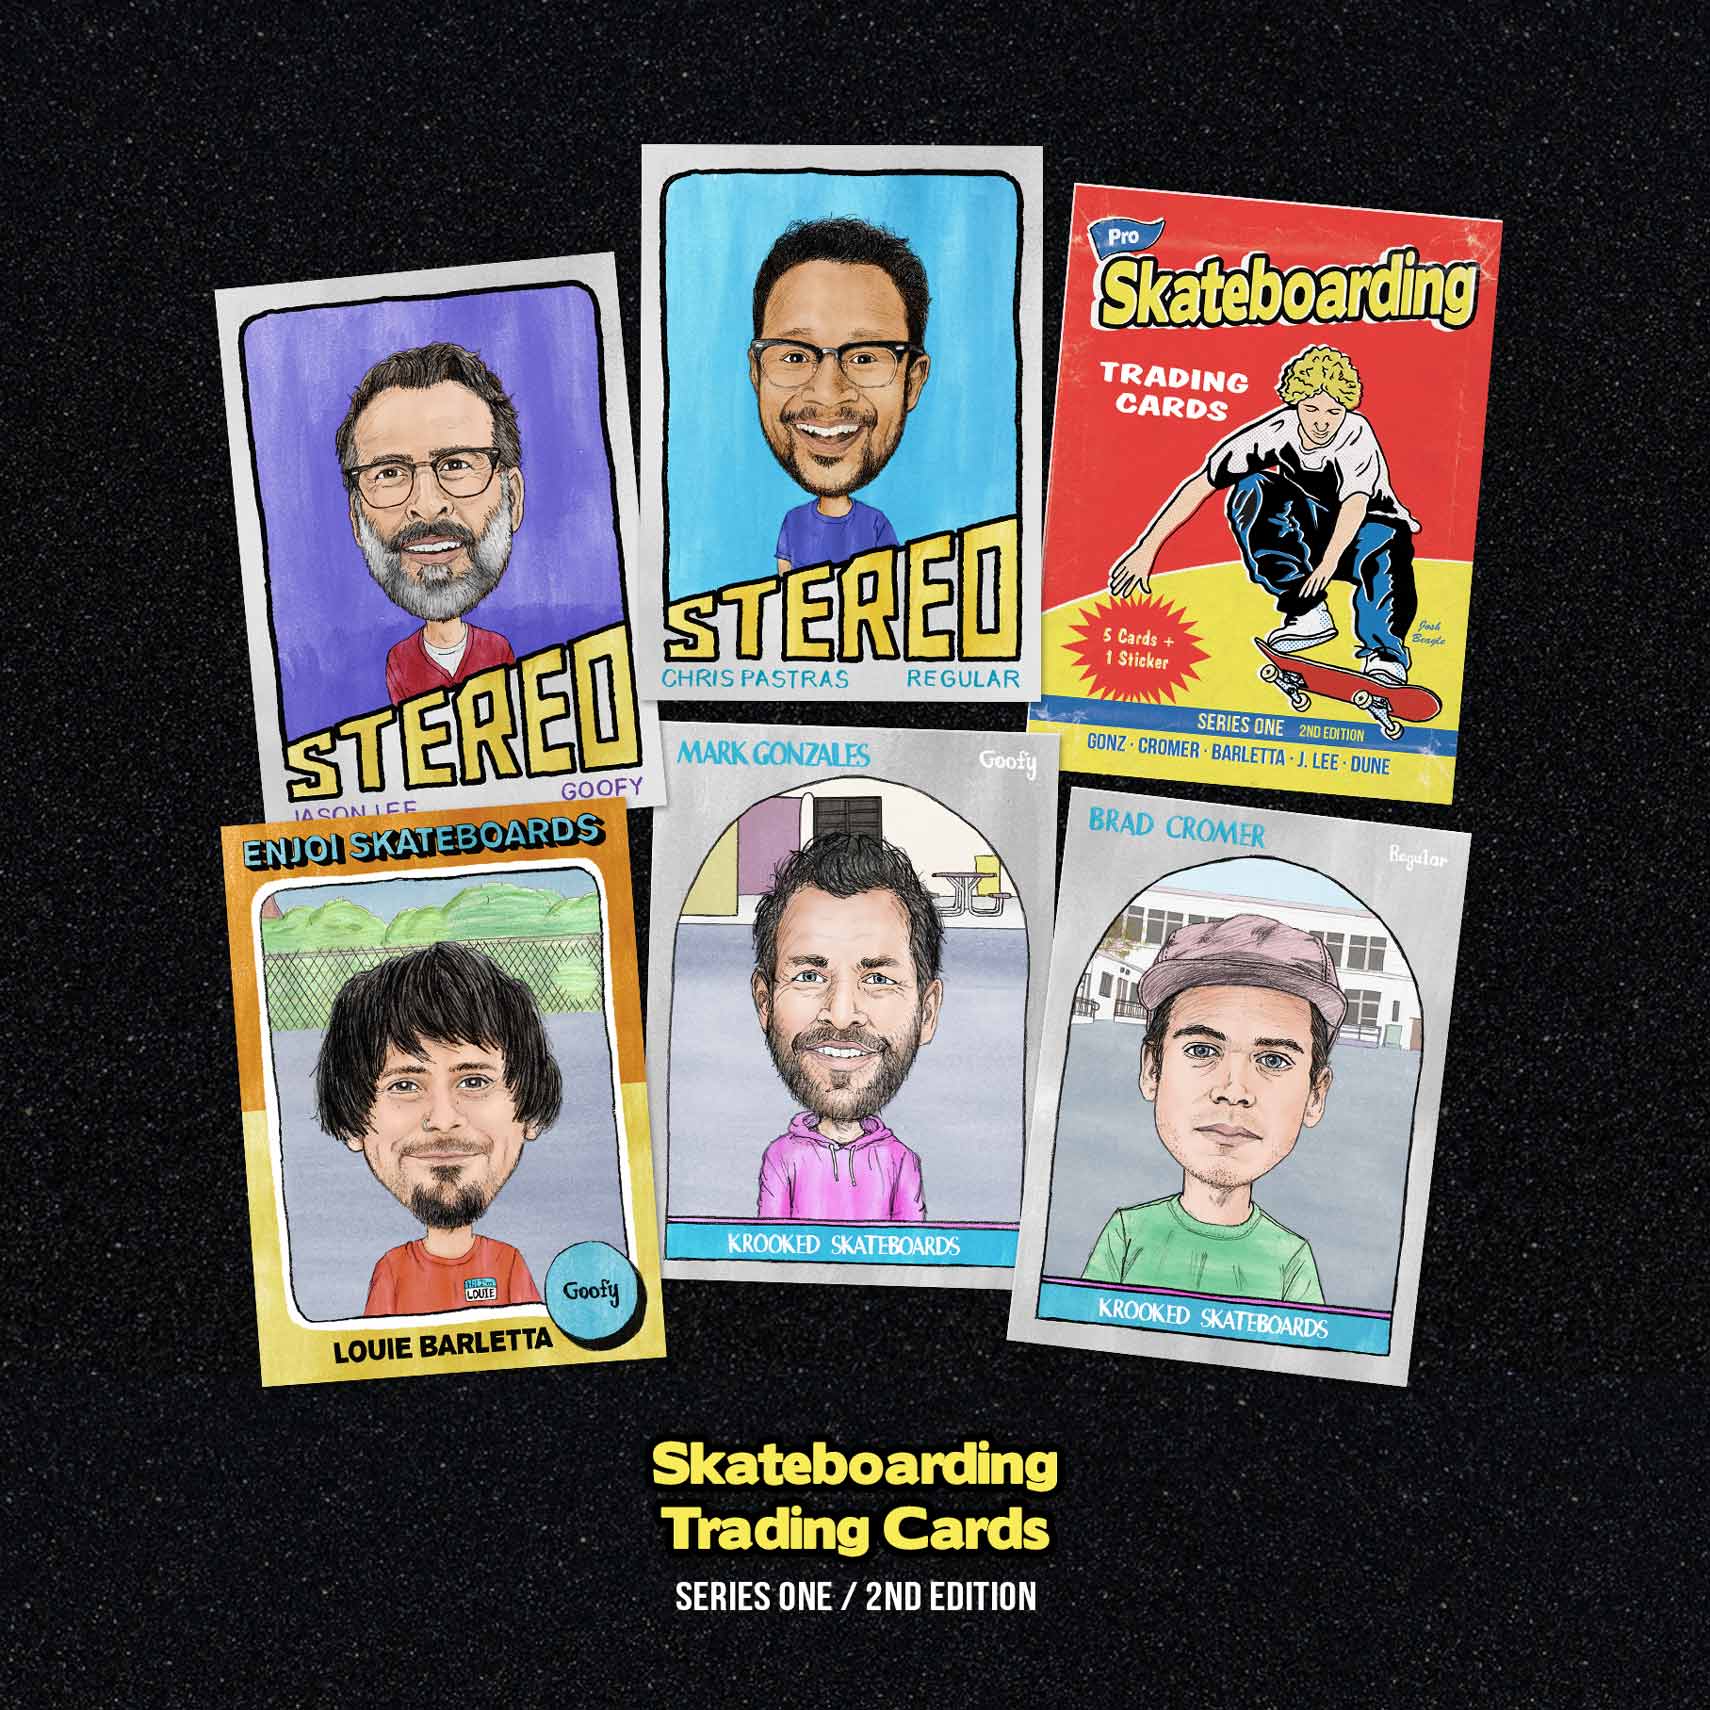 Series 1: Set of 5 Illustrated Trading Cards of Pro Skaters